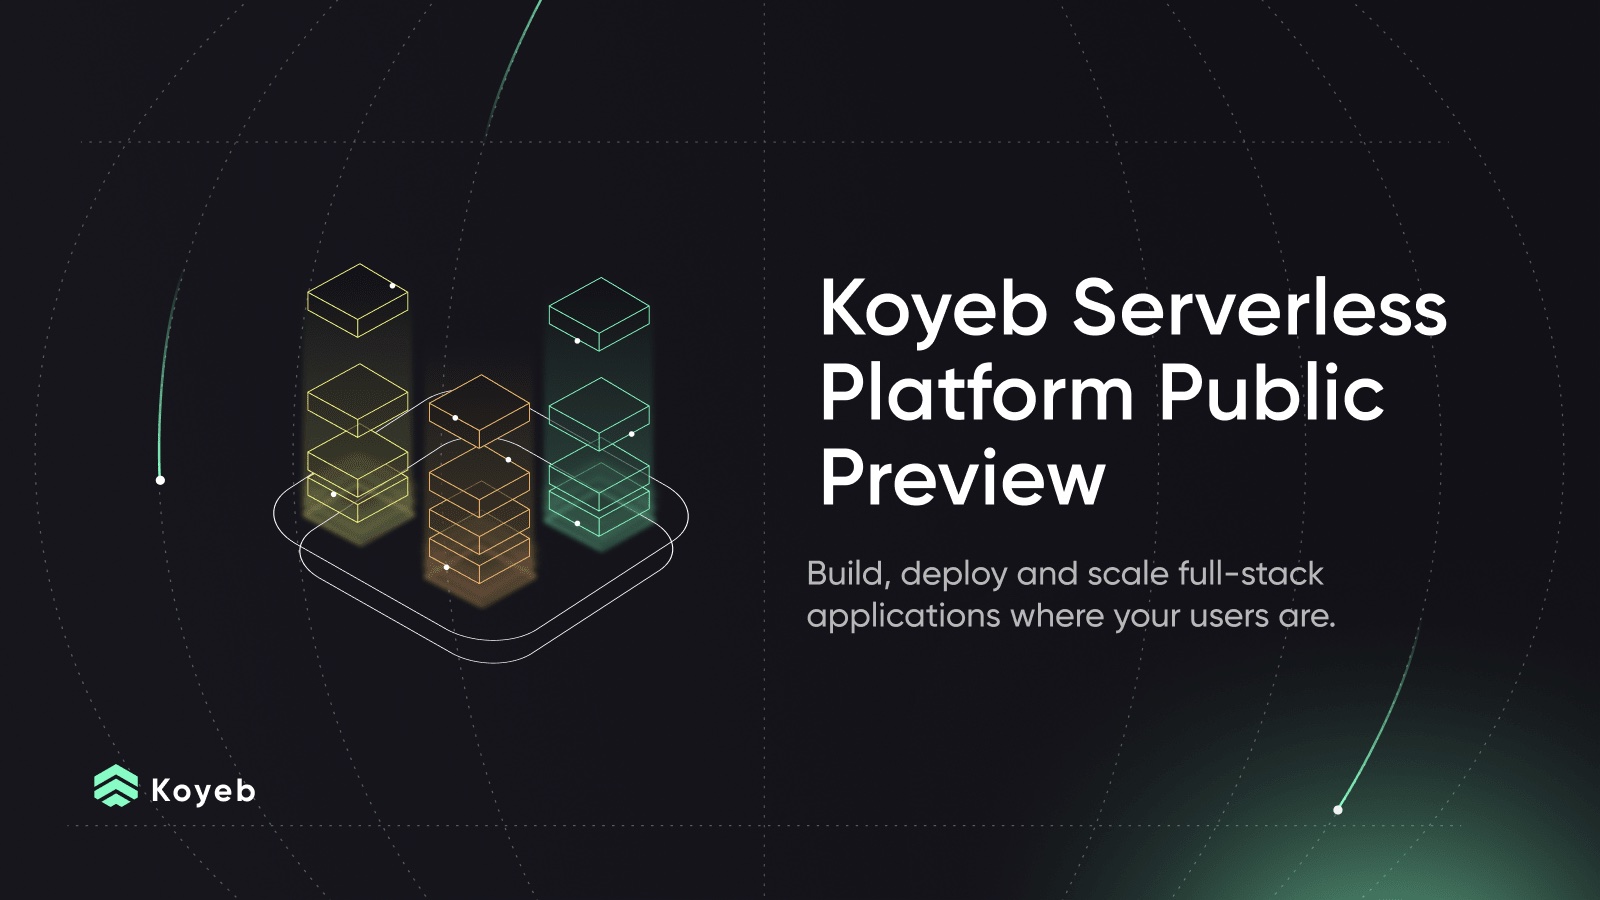 If you don't know us yet, Koyeb is the developer platform to build, deploy and scale full-stack applications where your users are. We've bee